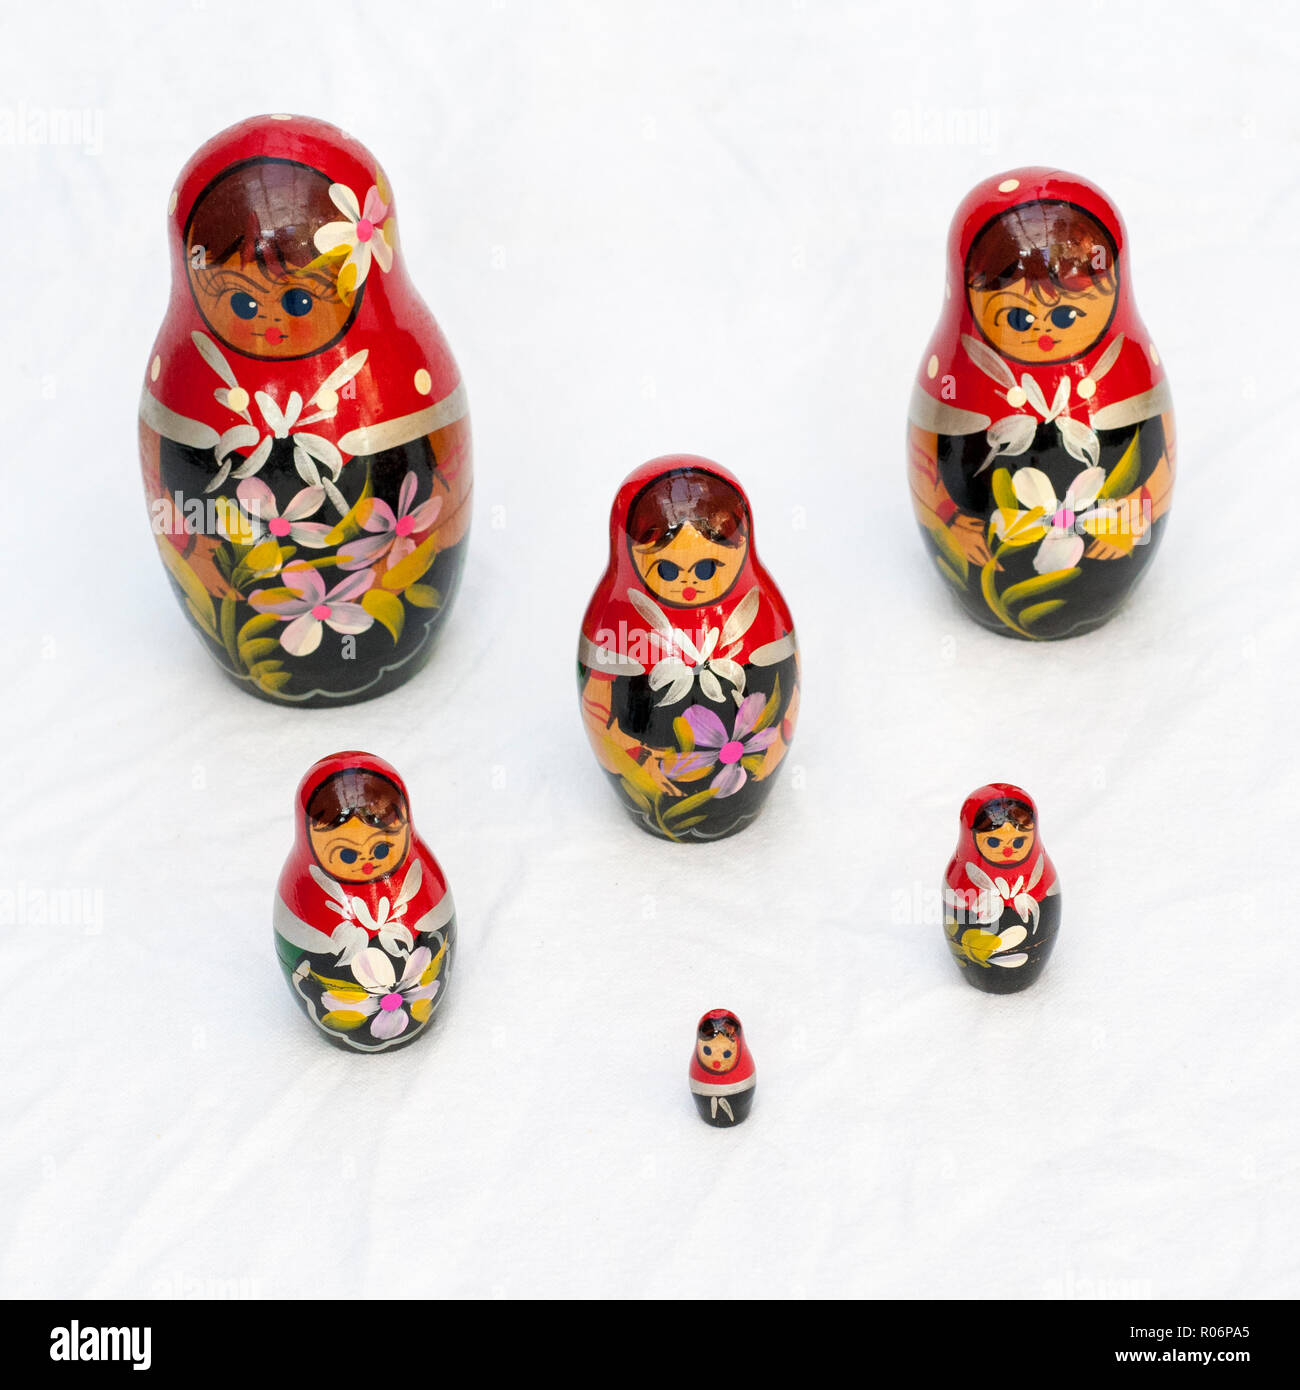 Collection of Russian Dolls Also called Stacking or nesting dolls . Stock Photo